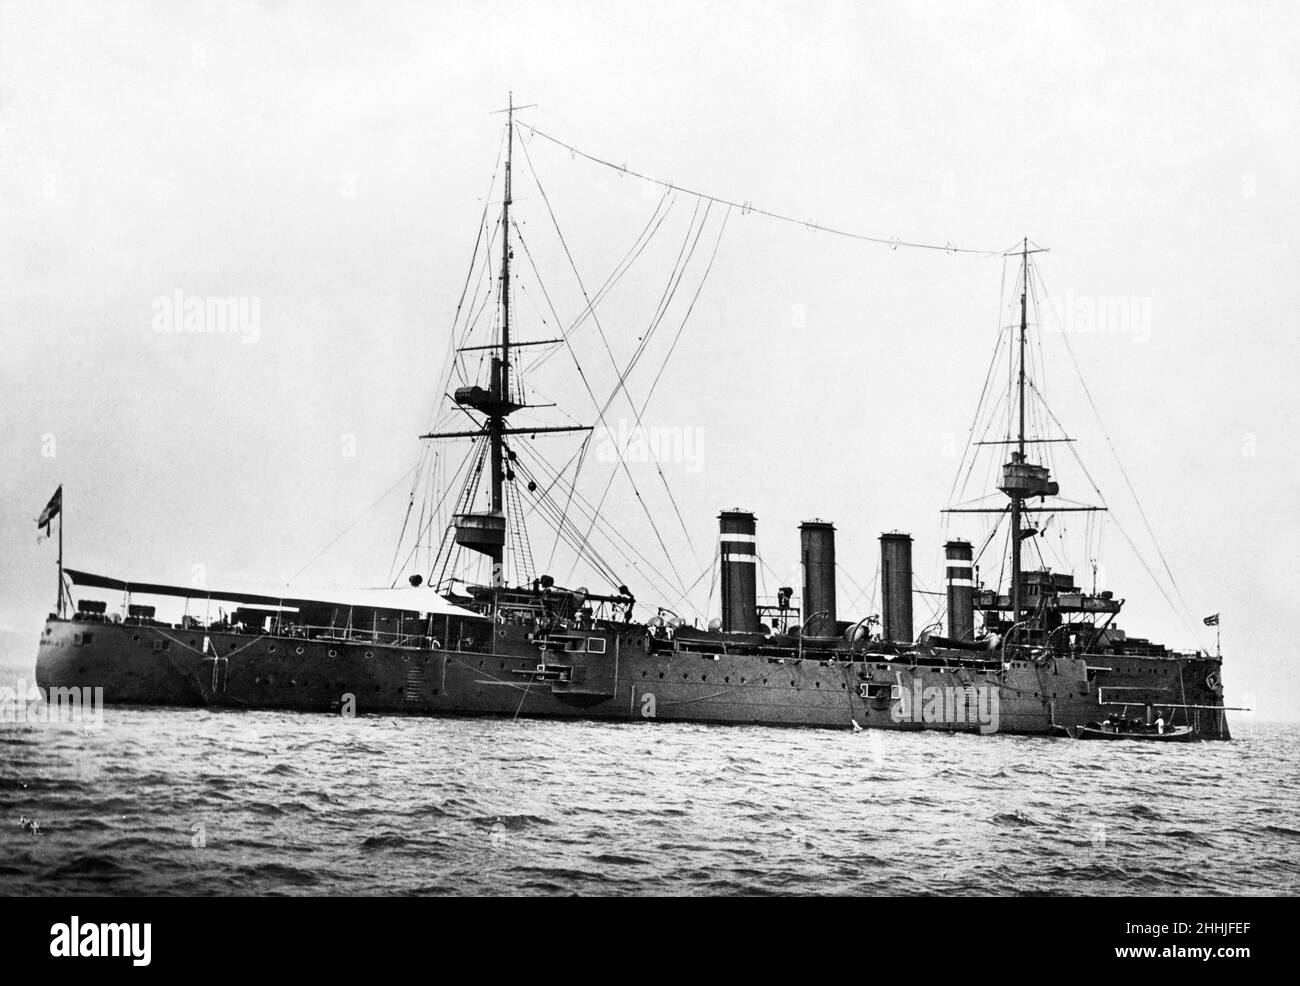 The Devonshire class armoured cruiser HMS Hampshire of the British Royal Navy. Launched in September 1903 she participated in World War One and was present at the Battle of Jutland. She was sunk in June 1916 off the mainland of Orkney en route to Russia where she is believed to have struck a mine laid by a German submarine. She was  carrying the Secretary of State for War, Field Marshal Lord Kitchener who was killed along with his staff.  January 1913. Stock Photo